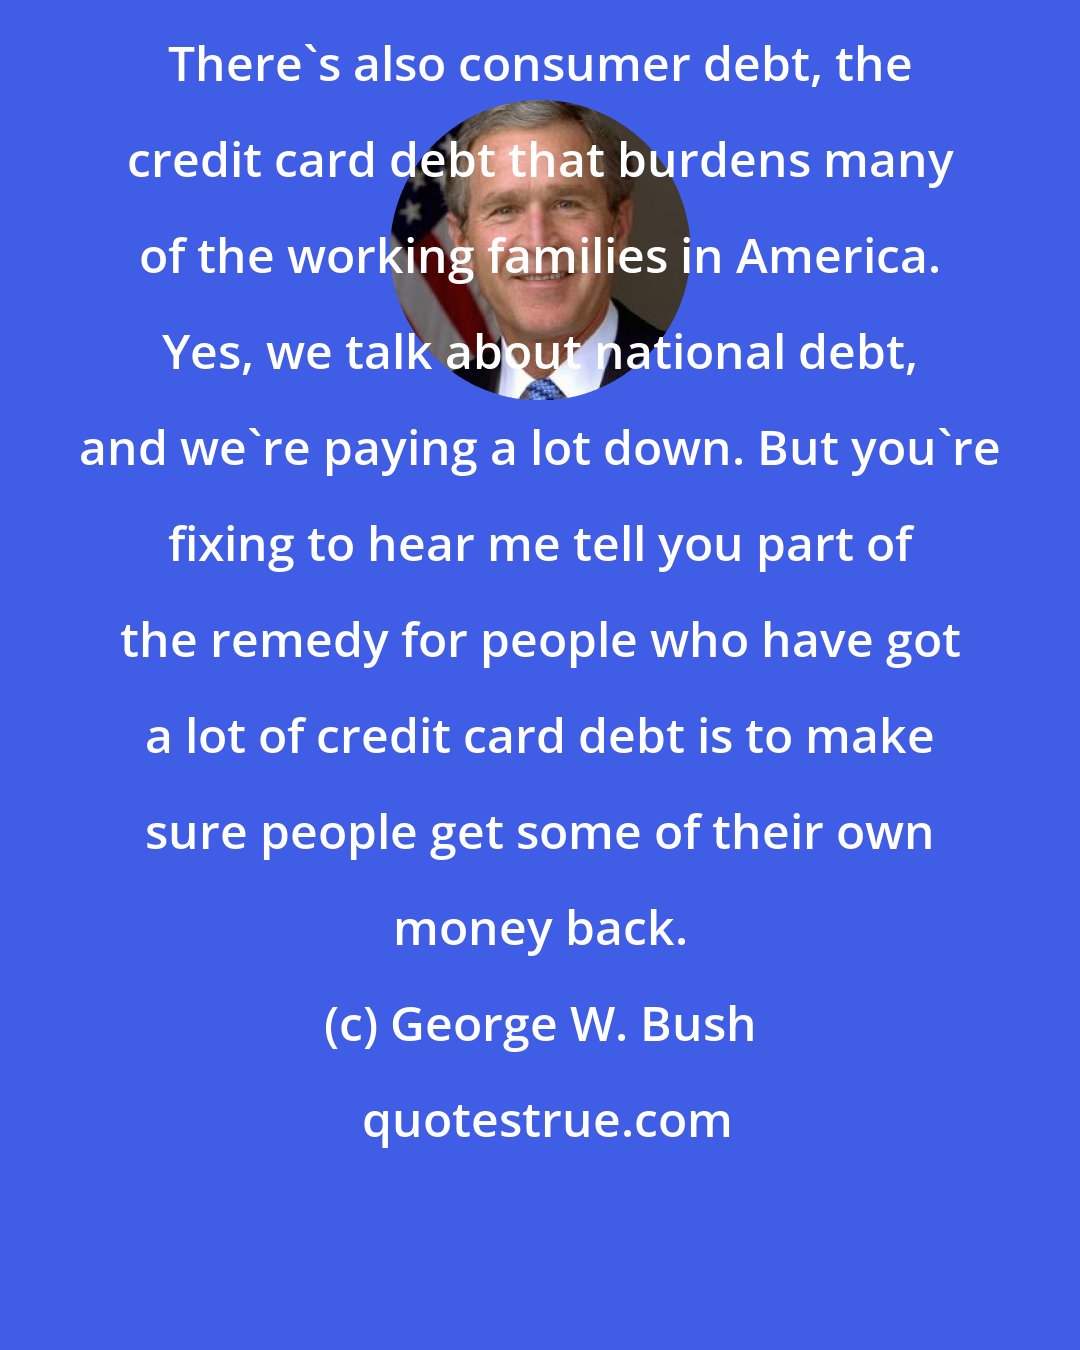 George W. Bush: There's also consumer debt, the credit card debt that burdens many of the working families in America. Yes, we talk about national debt, and we're paying a lot down. But you're fixing to hear me tell you part of the remedy for people who have got a lot of credit card debt is to make sure people get some of their own money back.